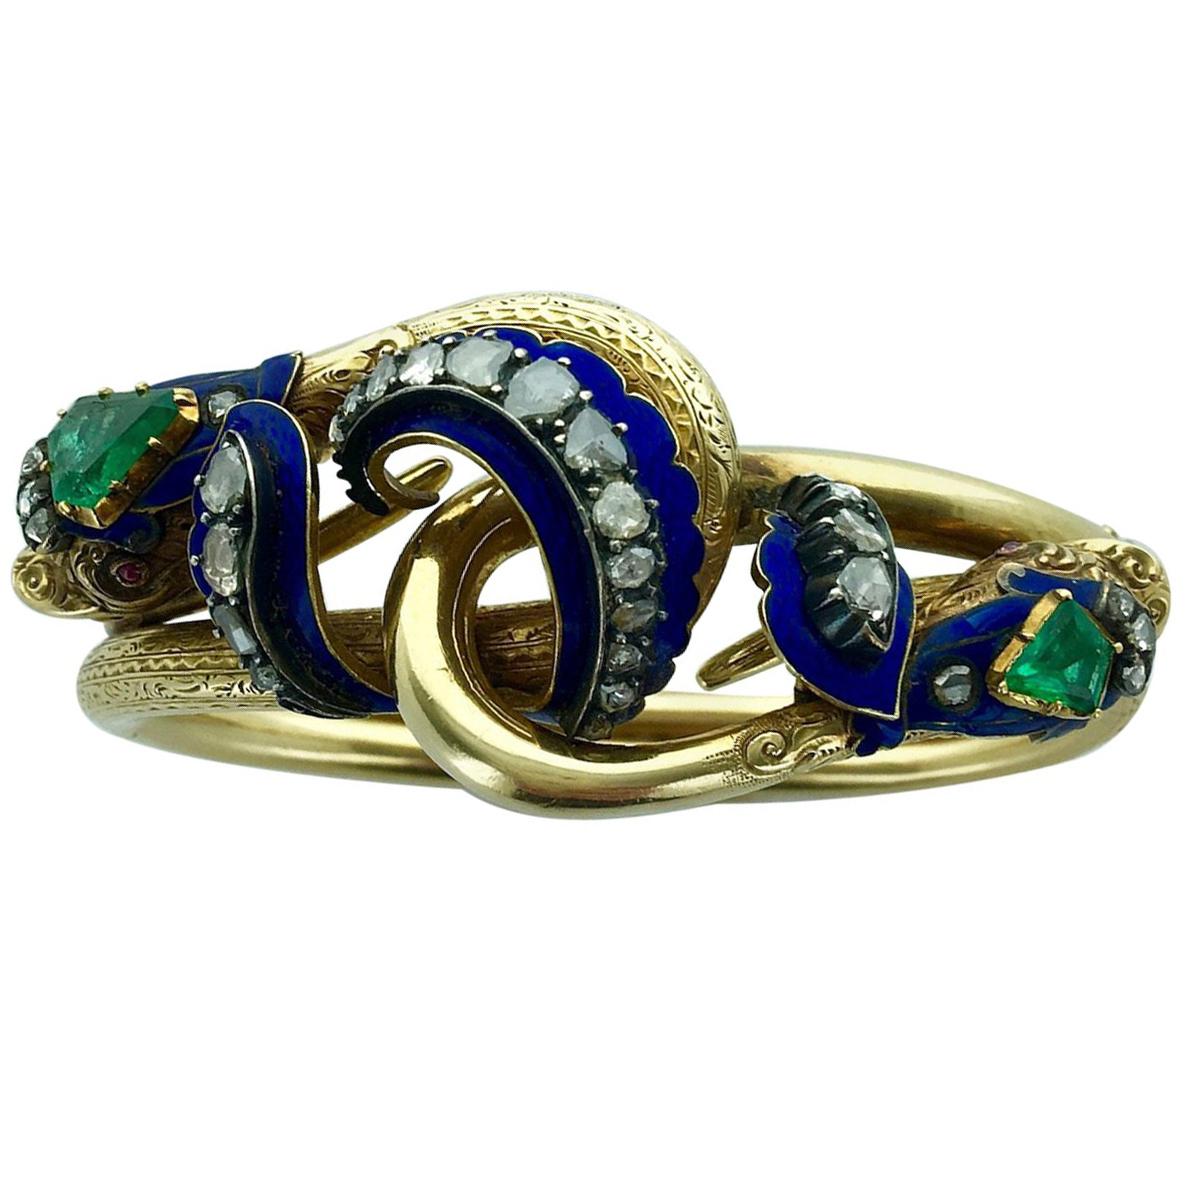 Victorian collectable Masterpiece! Do not miss it. Two Snakes entwined in yellow gold engraved, blue enameled and topped by Rose-cut Diamond.Each Snake's head is enhanced by an Emerald.
XIXth Century.

Gross weight: 38.34 grams.